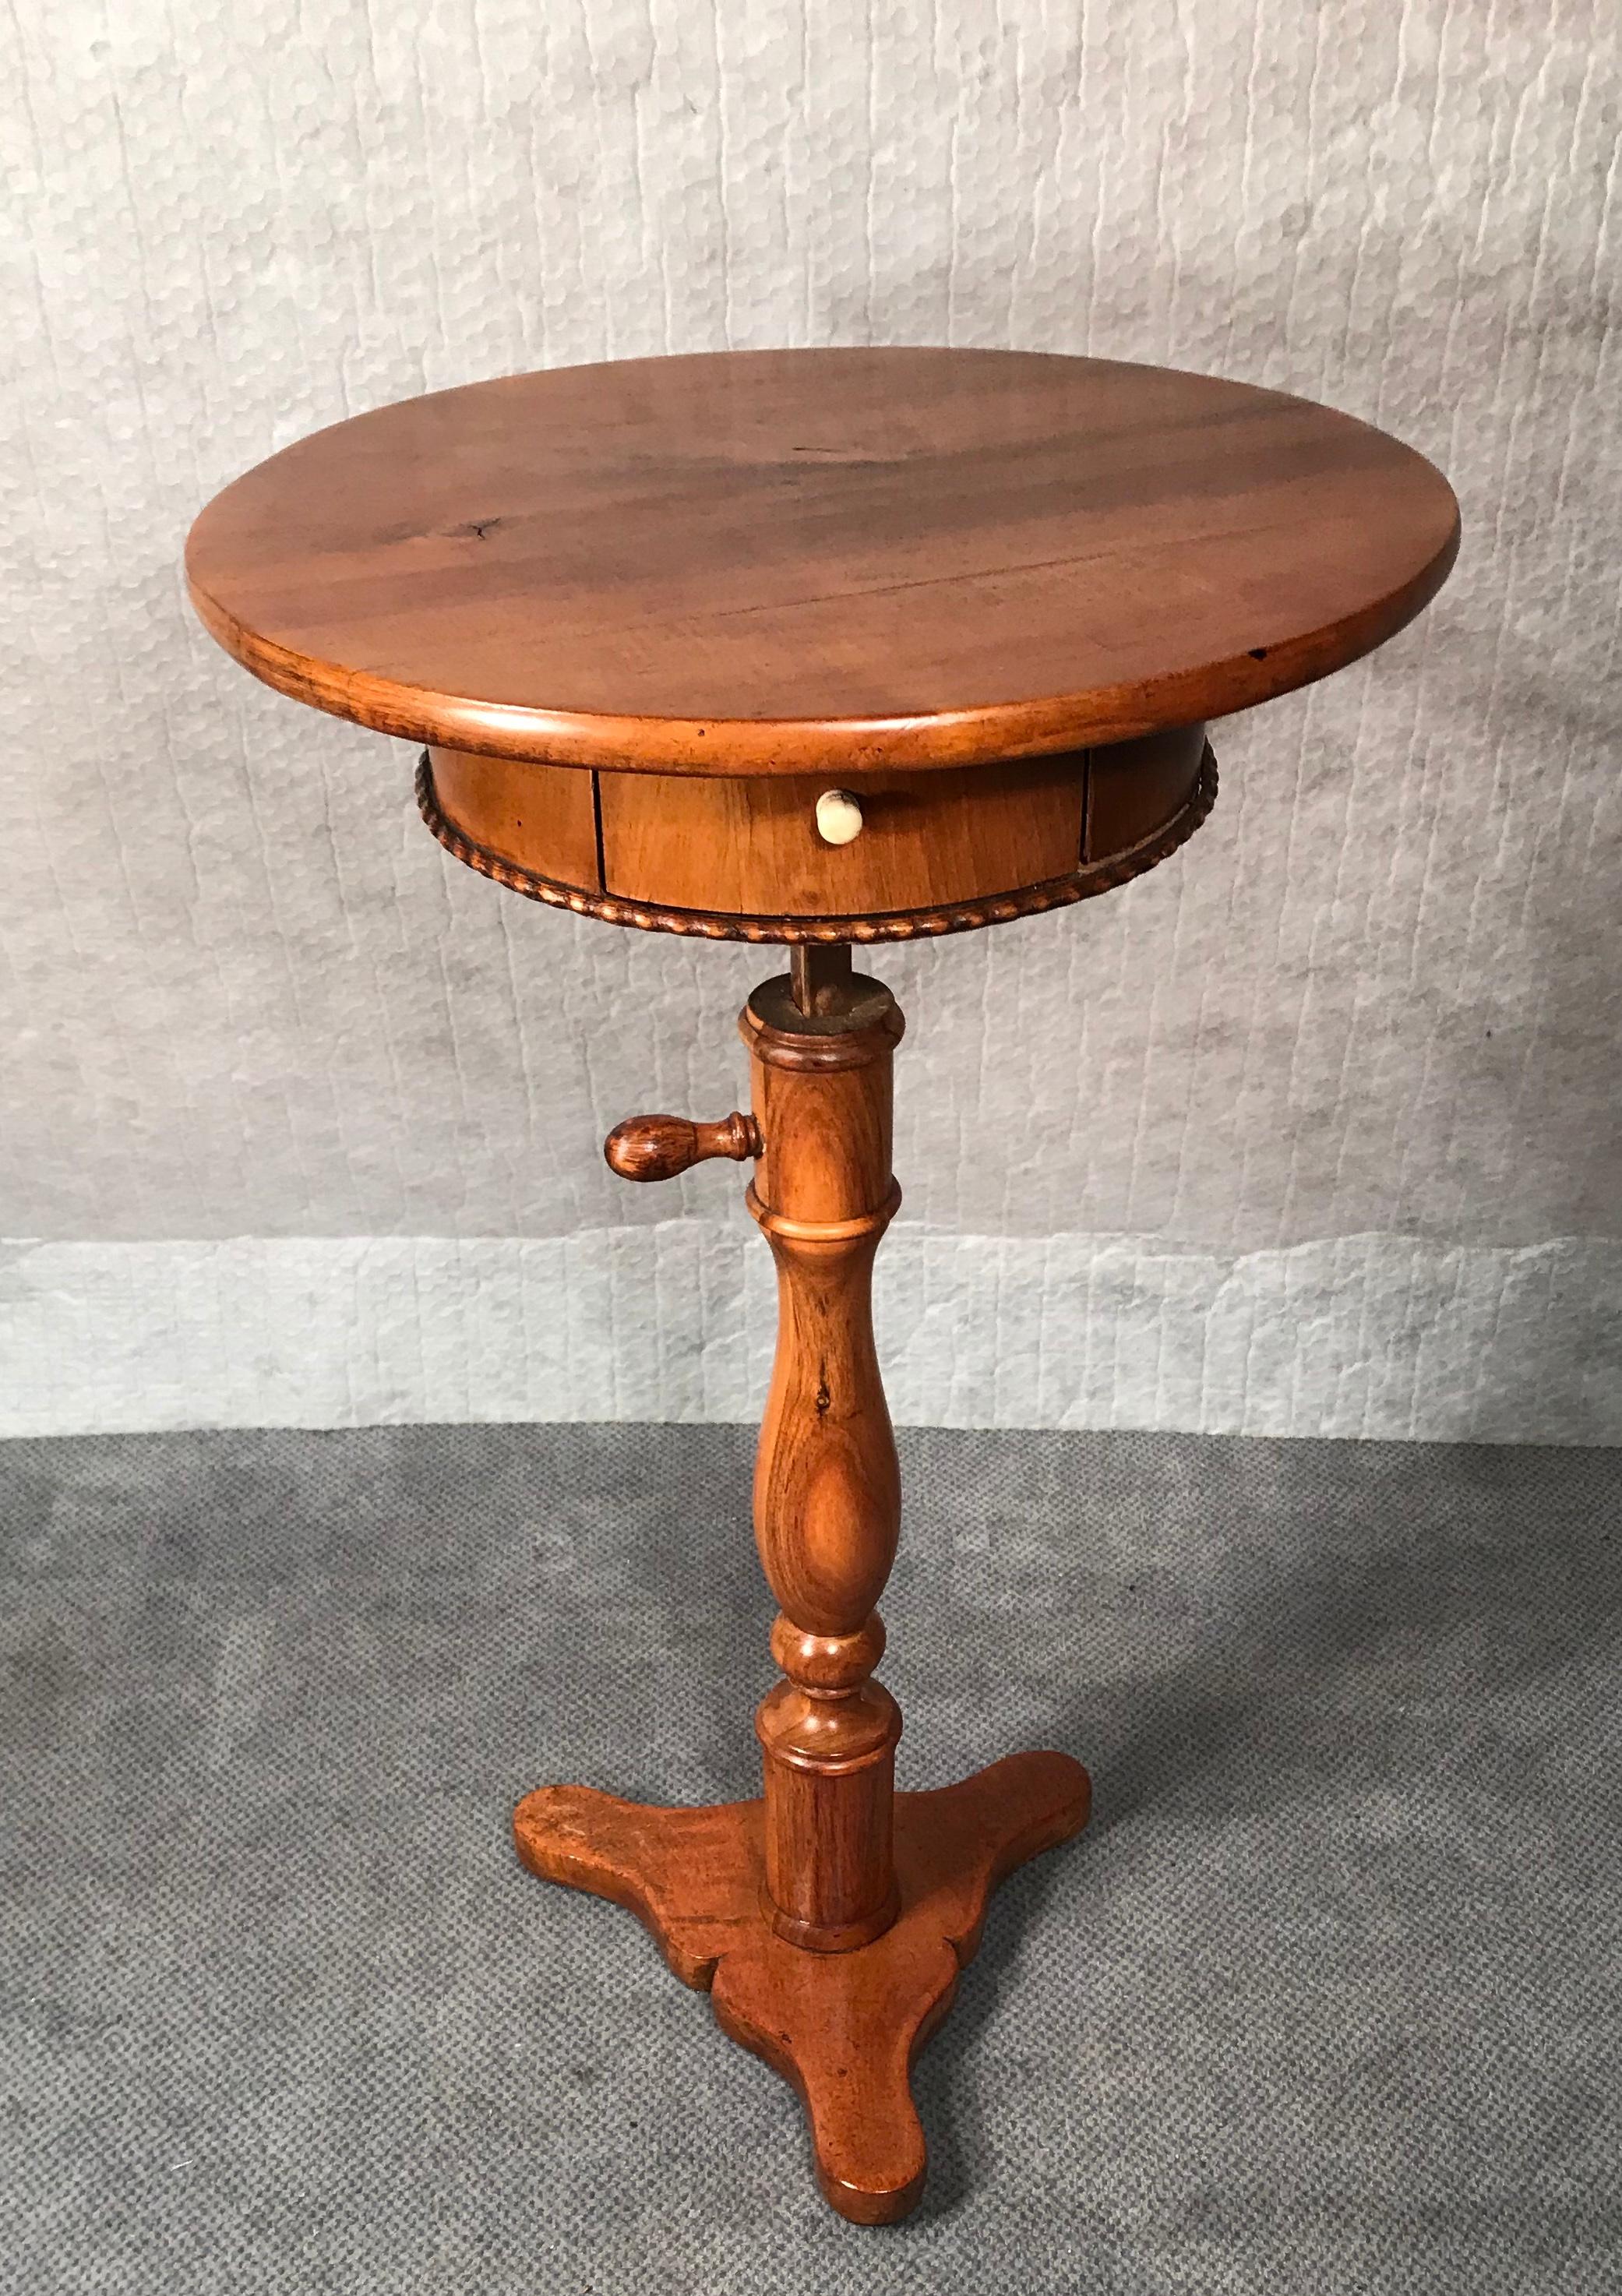 Unusual small classicist side table, South Germany, circa 1800, walnut, height adjustable. In good condition. The tables height can be adjusted from 26.77 to 30.70 inches. 